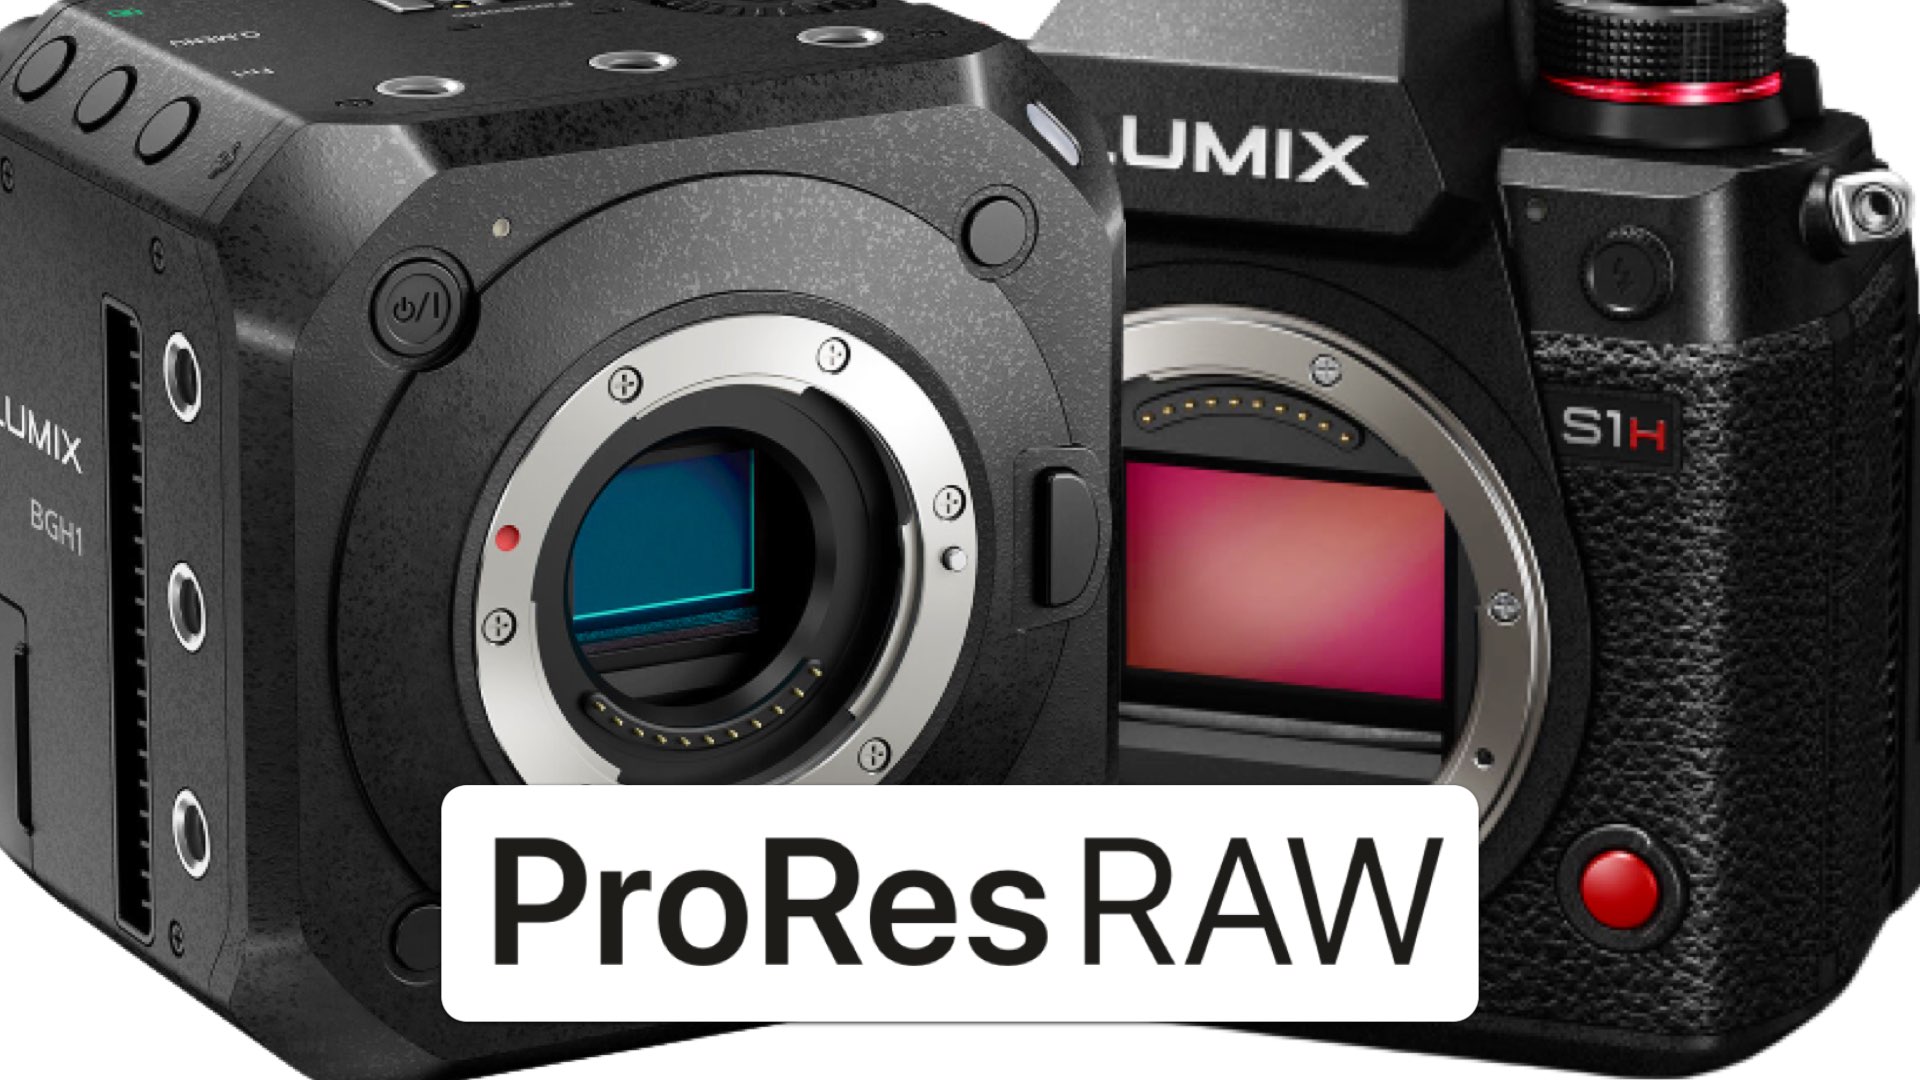 LUMIX BGH1 and LUMIX S1 can now Record ProRes RAW